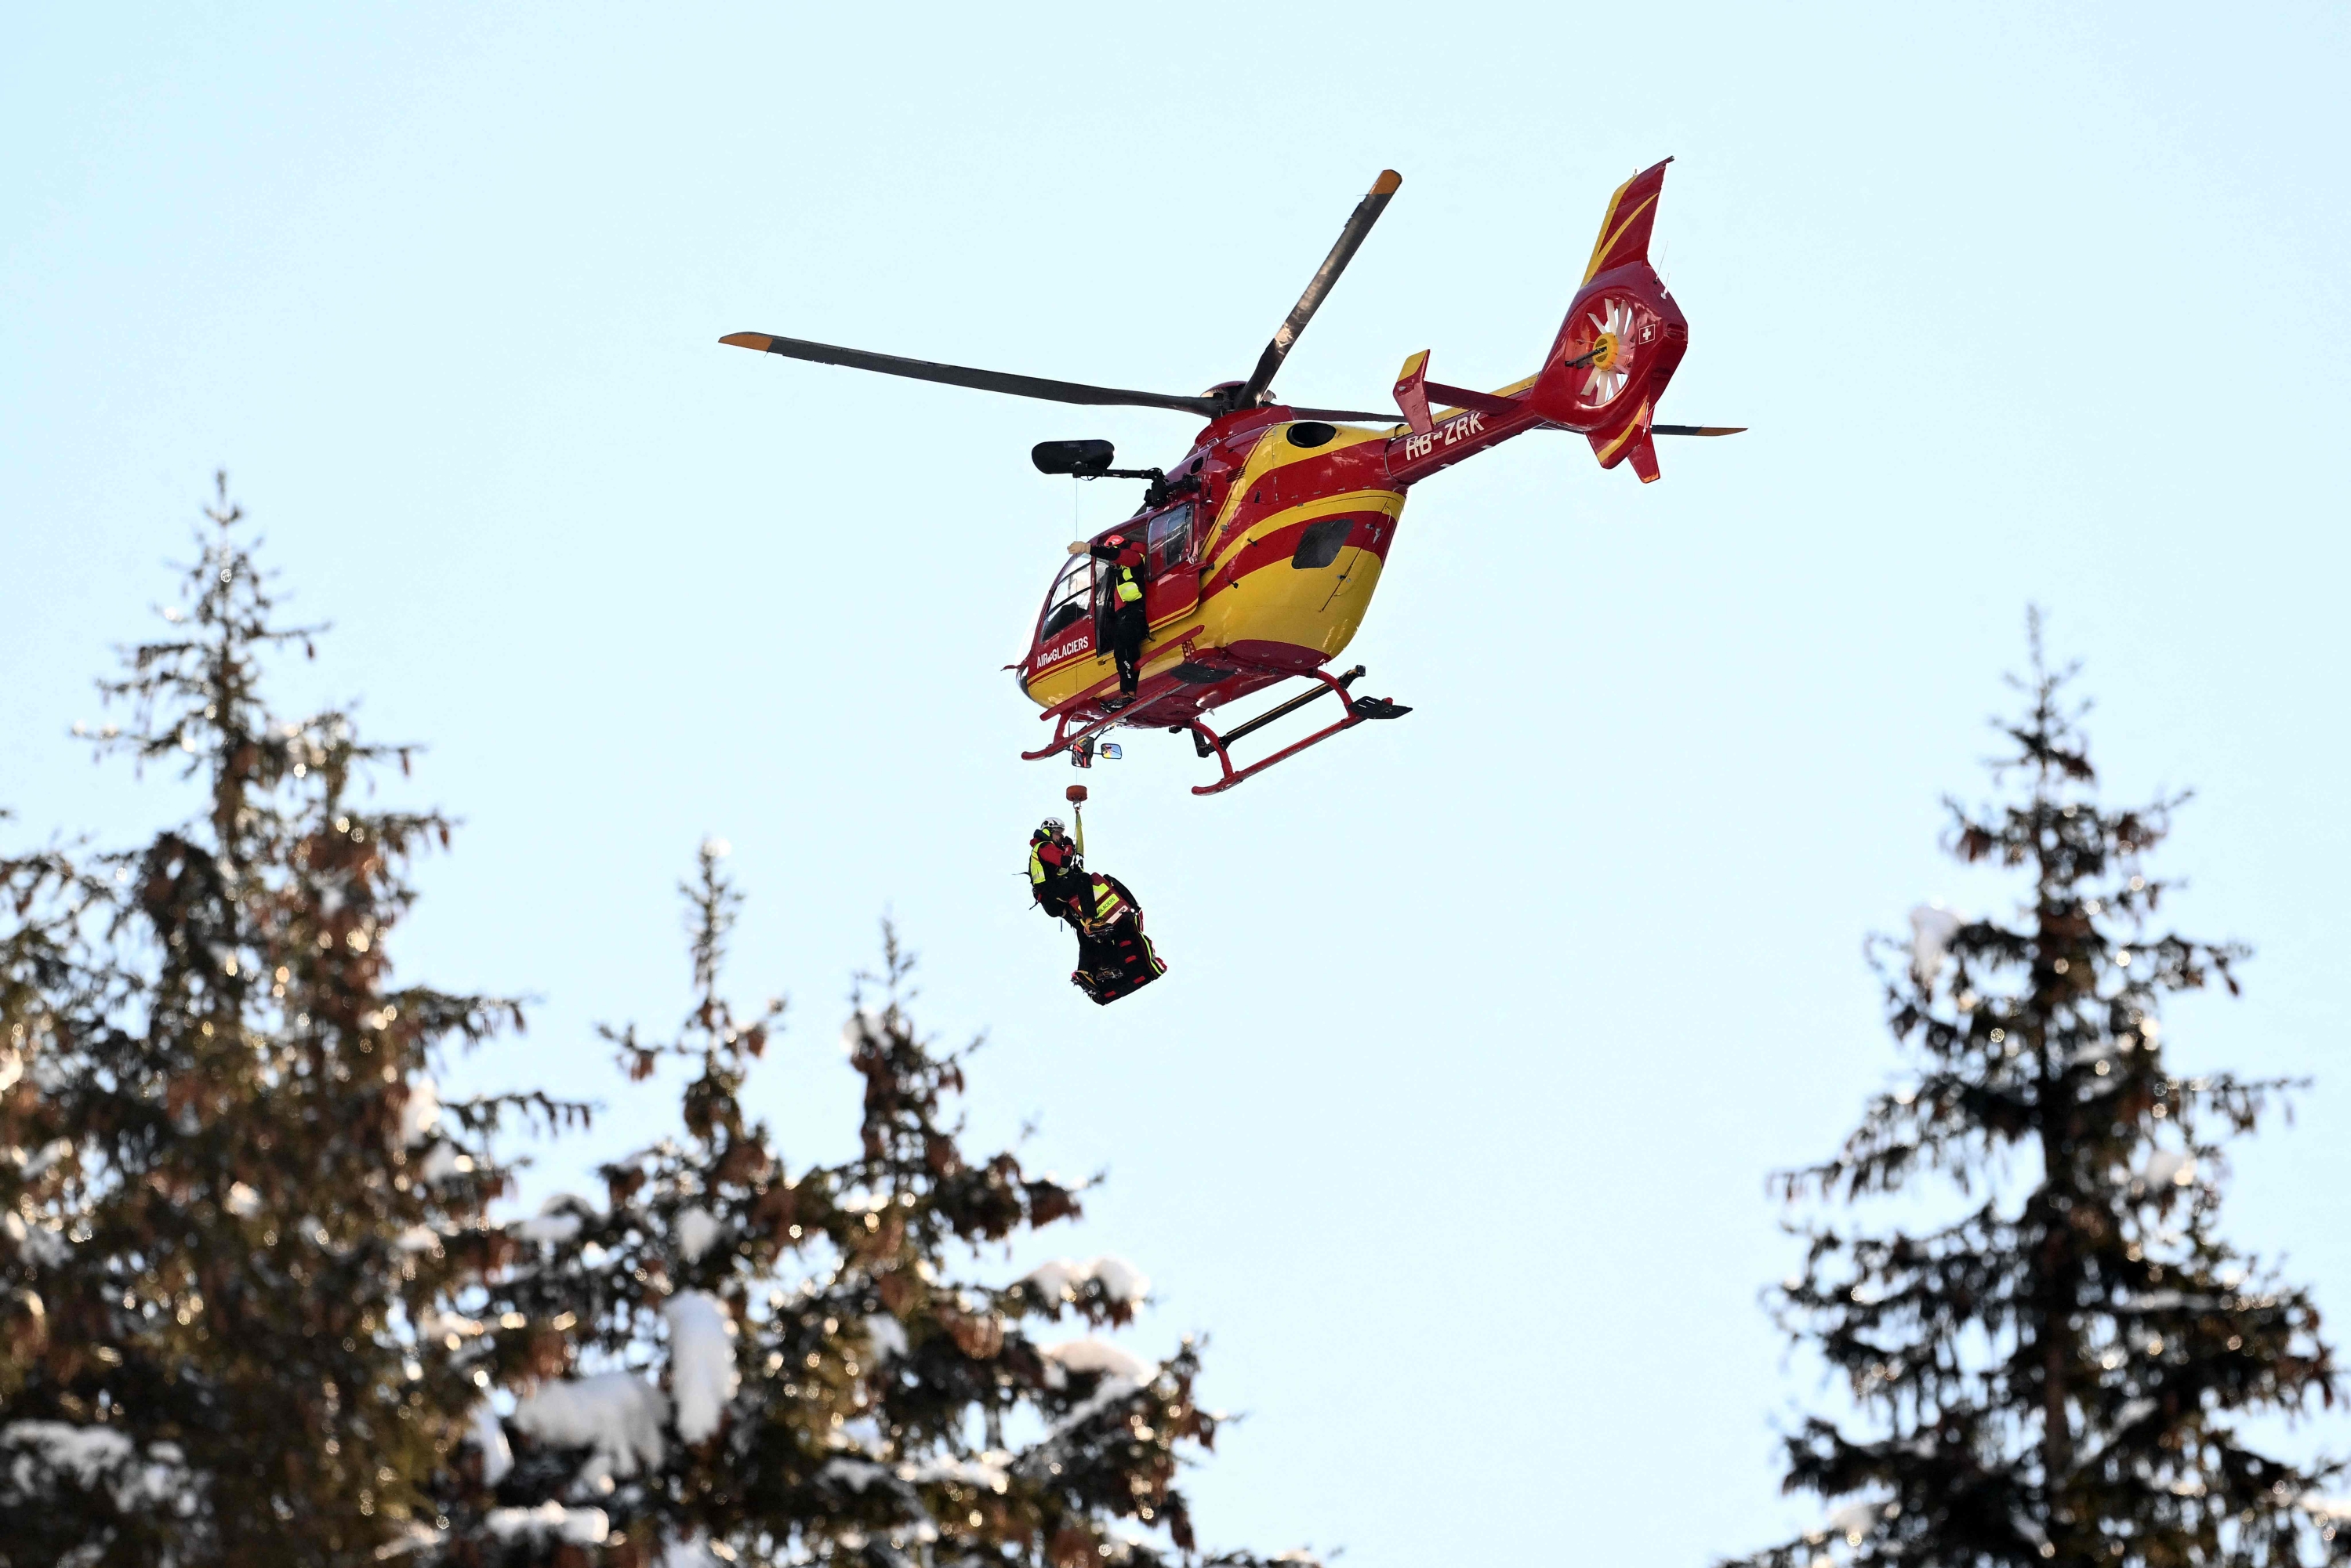 Rescuers arrive with a helicopter to evacuate France's Alexis Pinturault after he crashed during the men's Super-G event at the FIS Alpine Skiing World Cup event in Wengen on January 12, 2024. (Photo by Marco BERTORELLO / AFP)